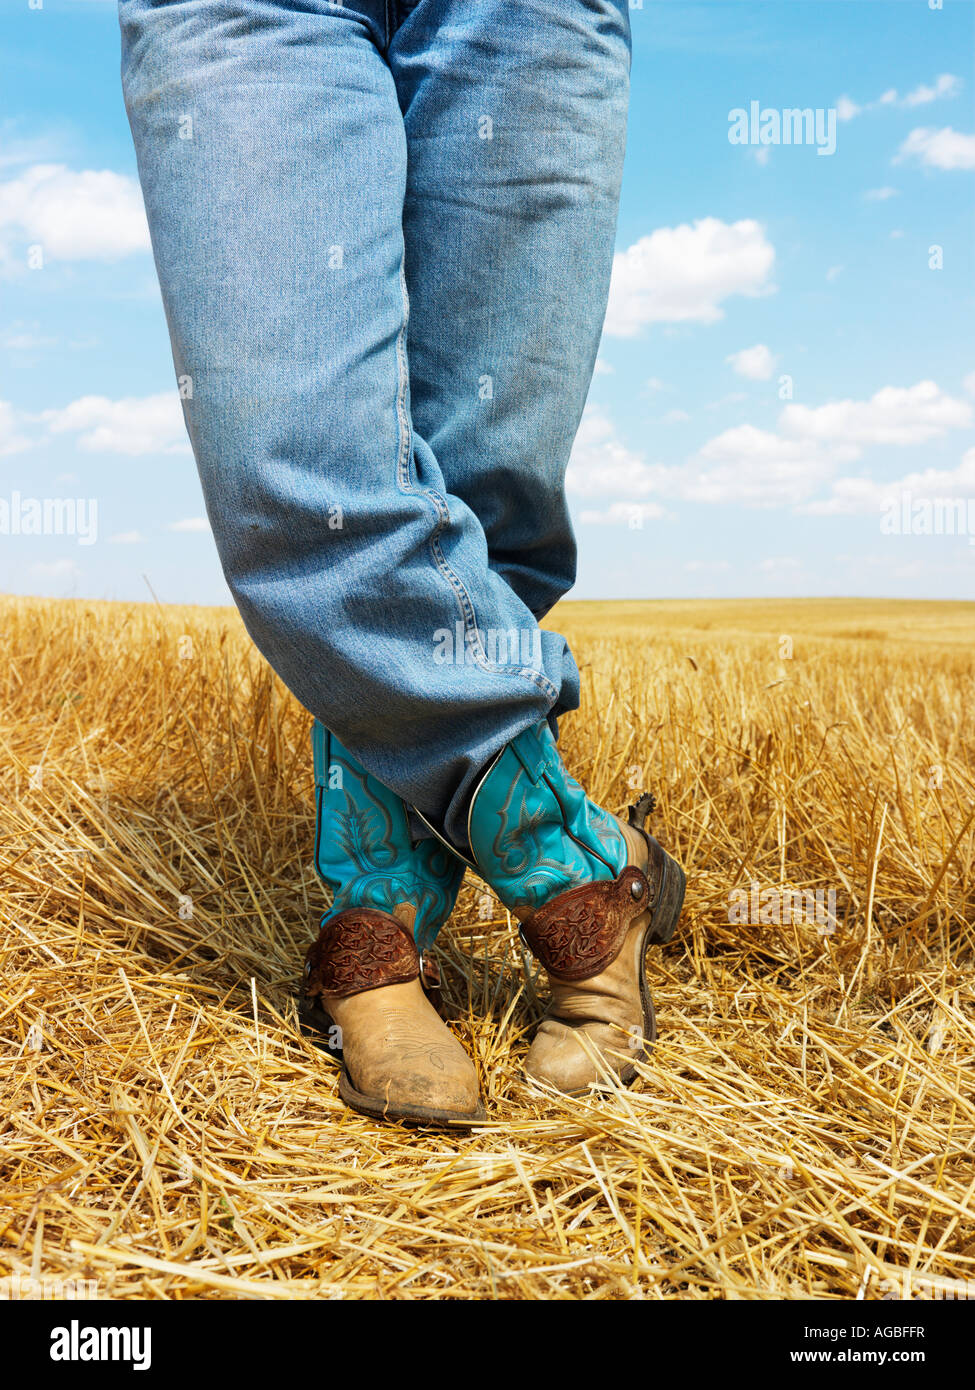 Cowboy standing in harvested crop field wearing funky cowboy boots Stock Photo